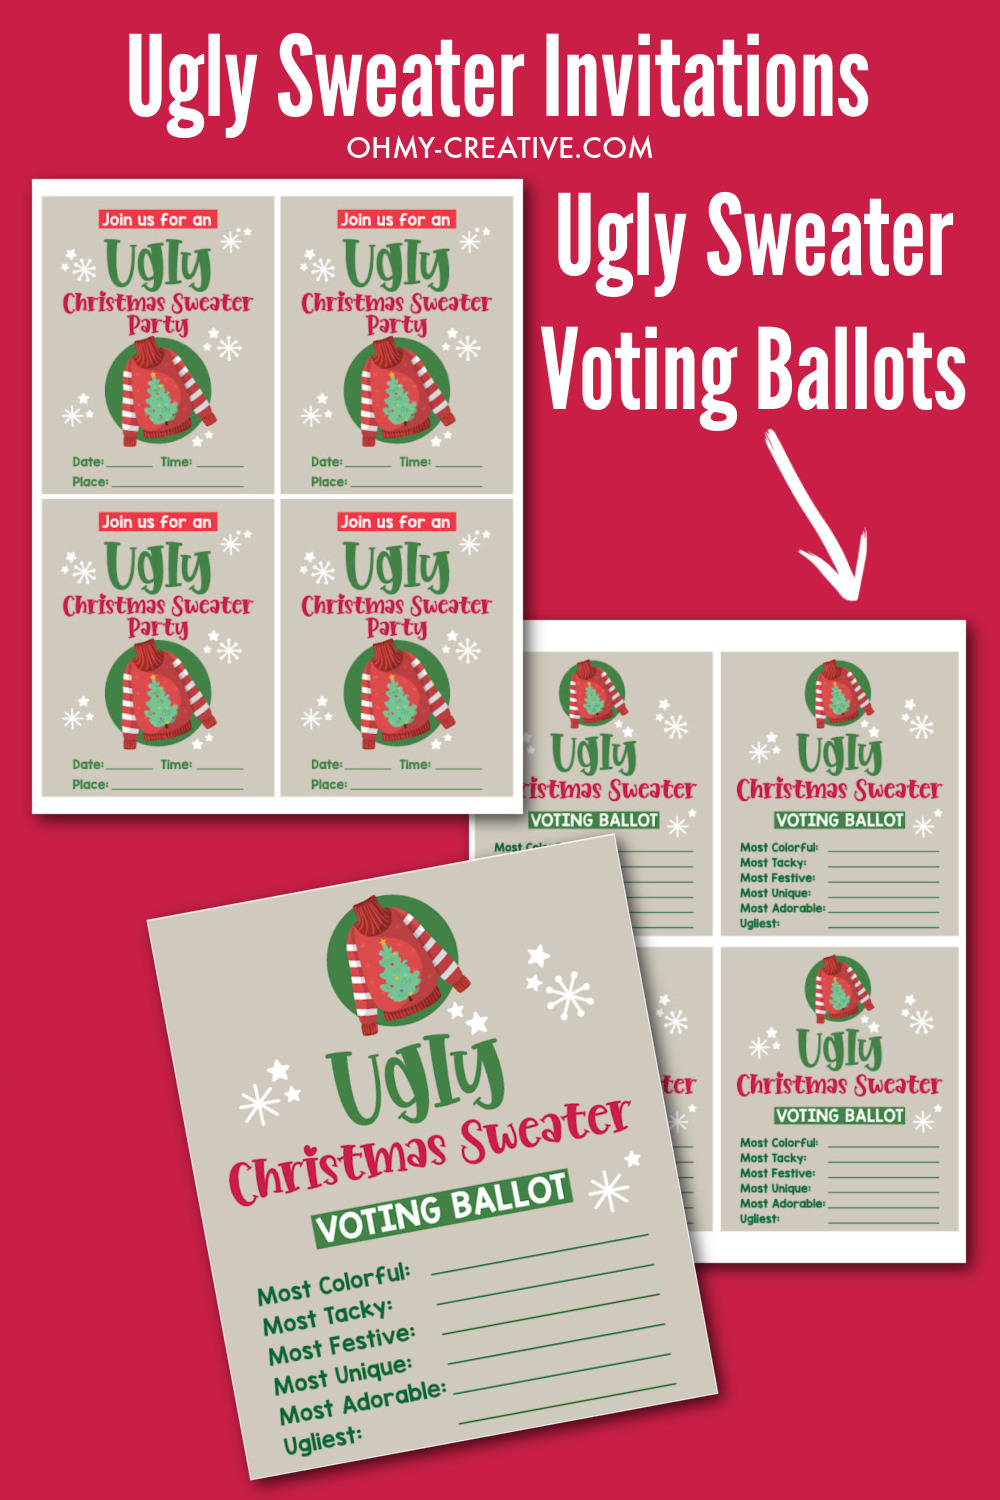 Ugly Christmas Sweater invitations and voting ballots.